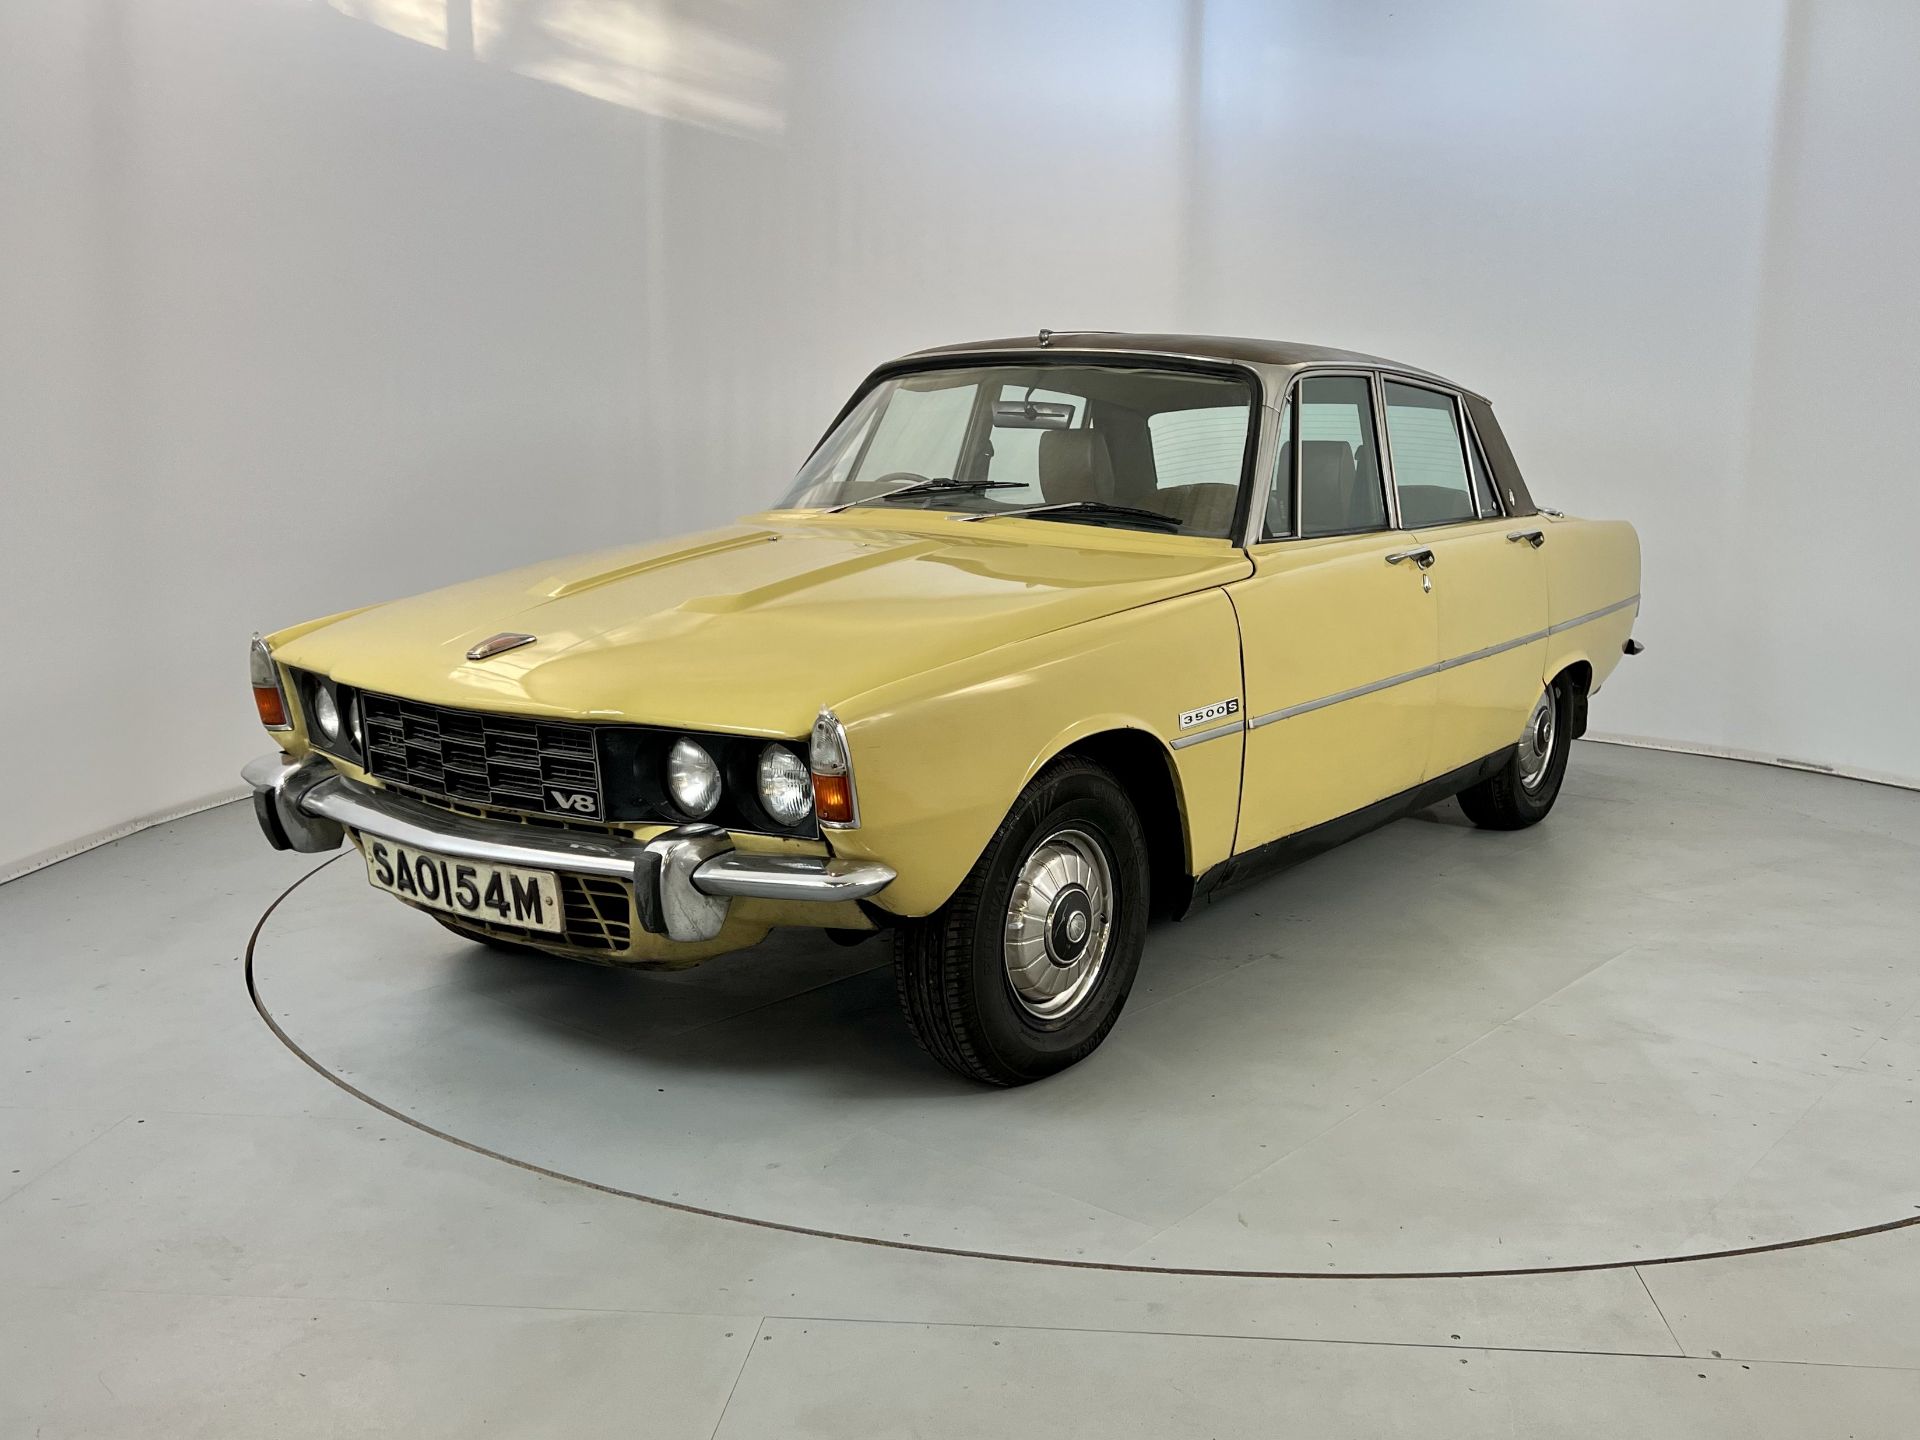 Rover 3500 S - Image 3 of 30